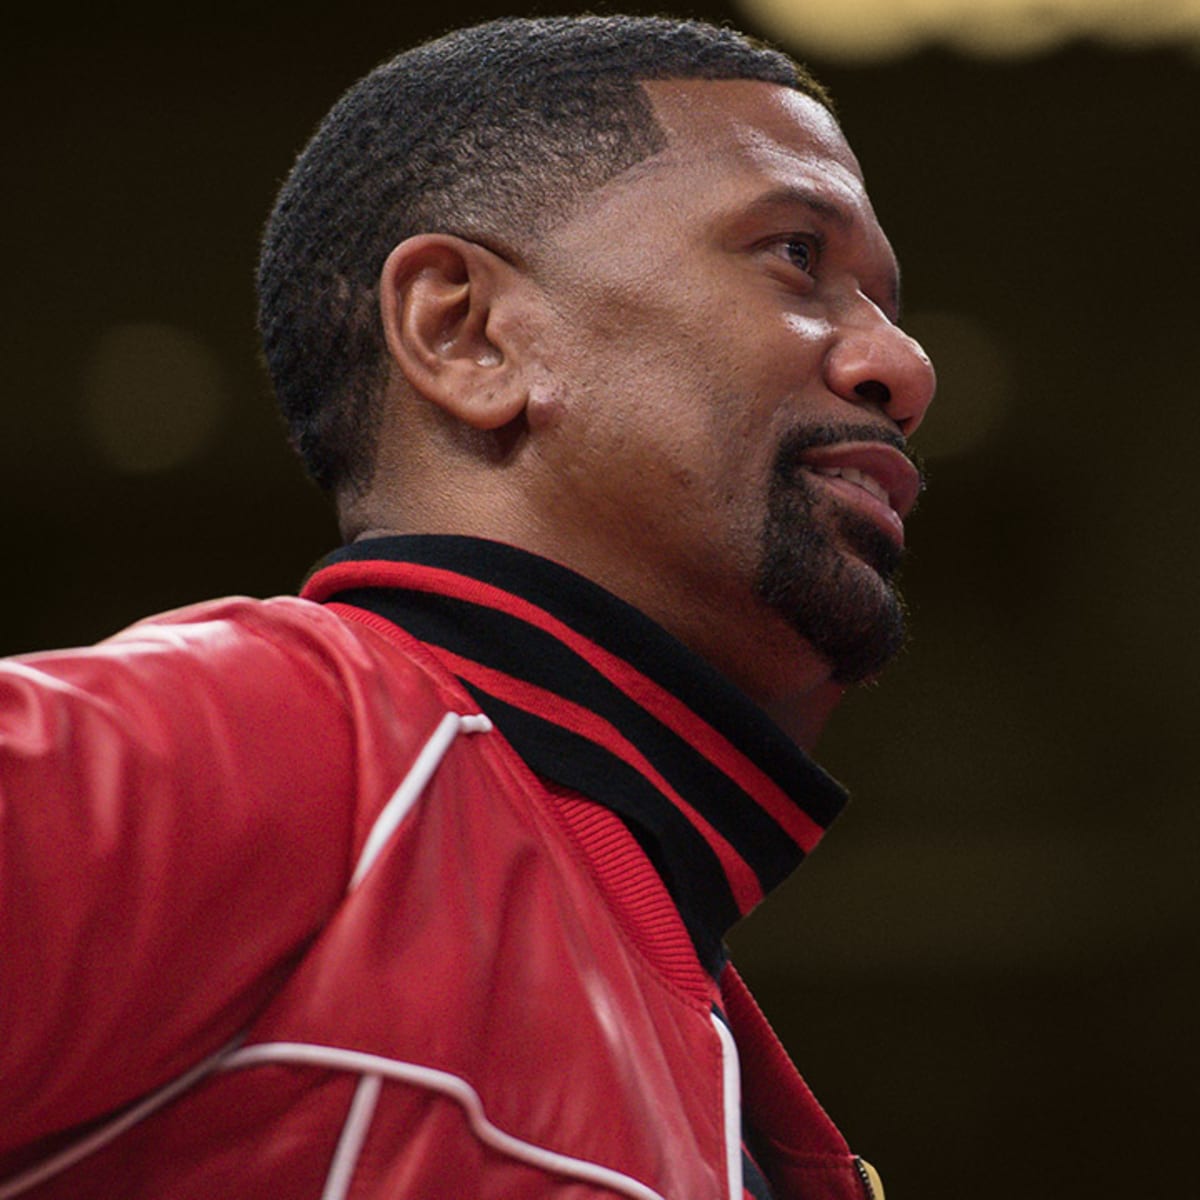 Jalen Rose partners with New York Post for columns, videos